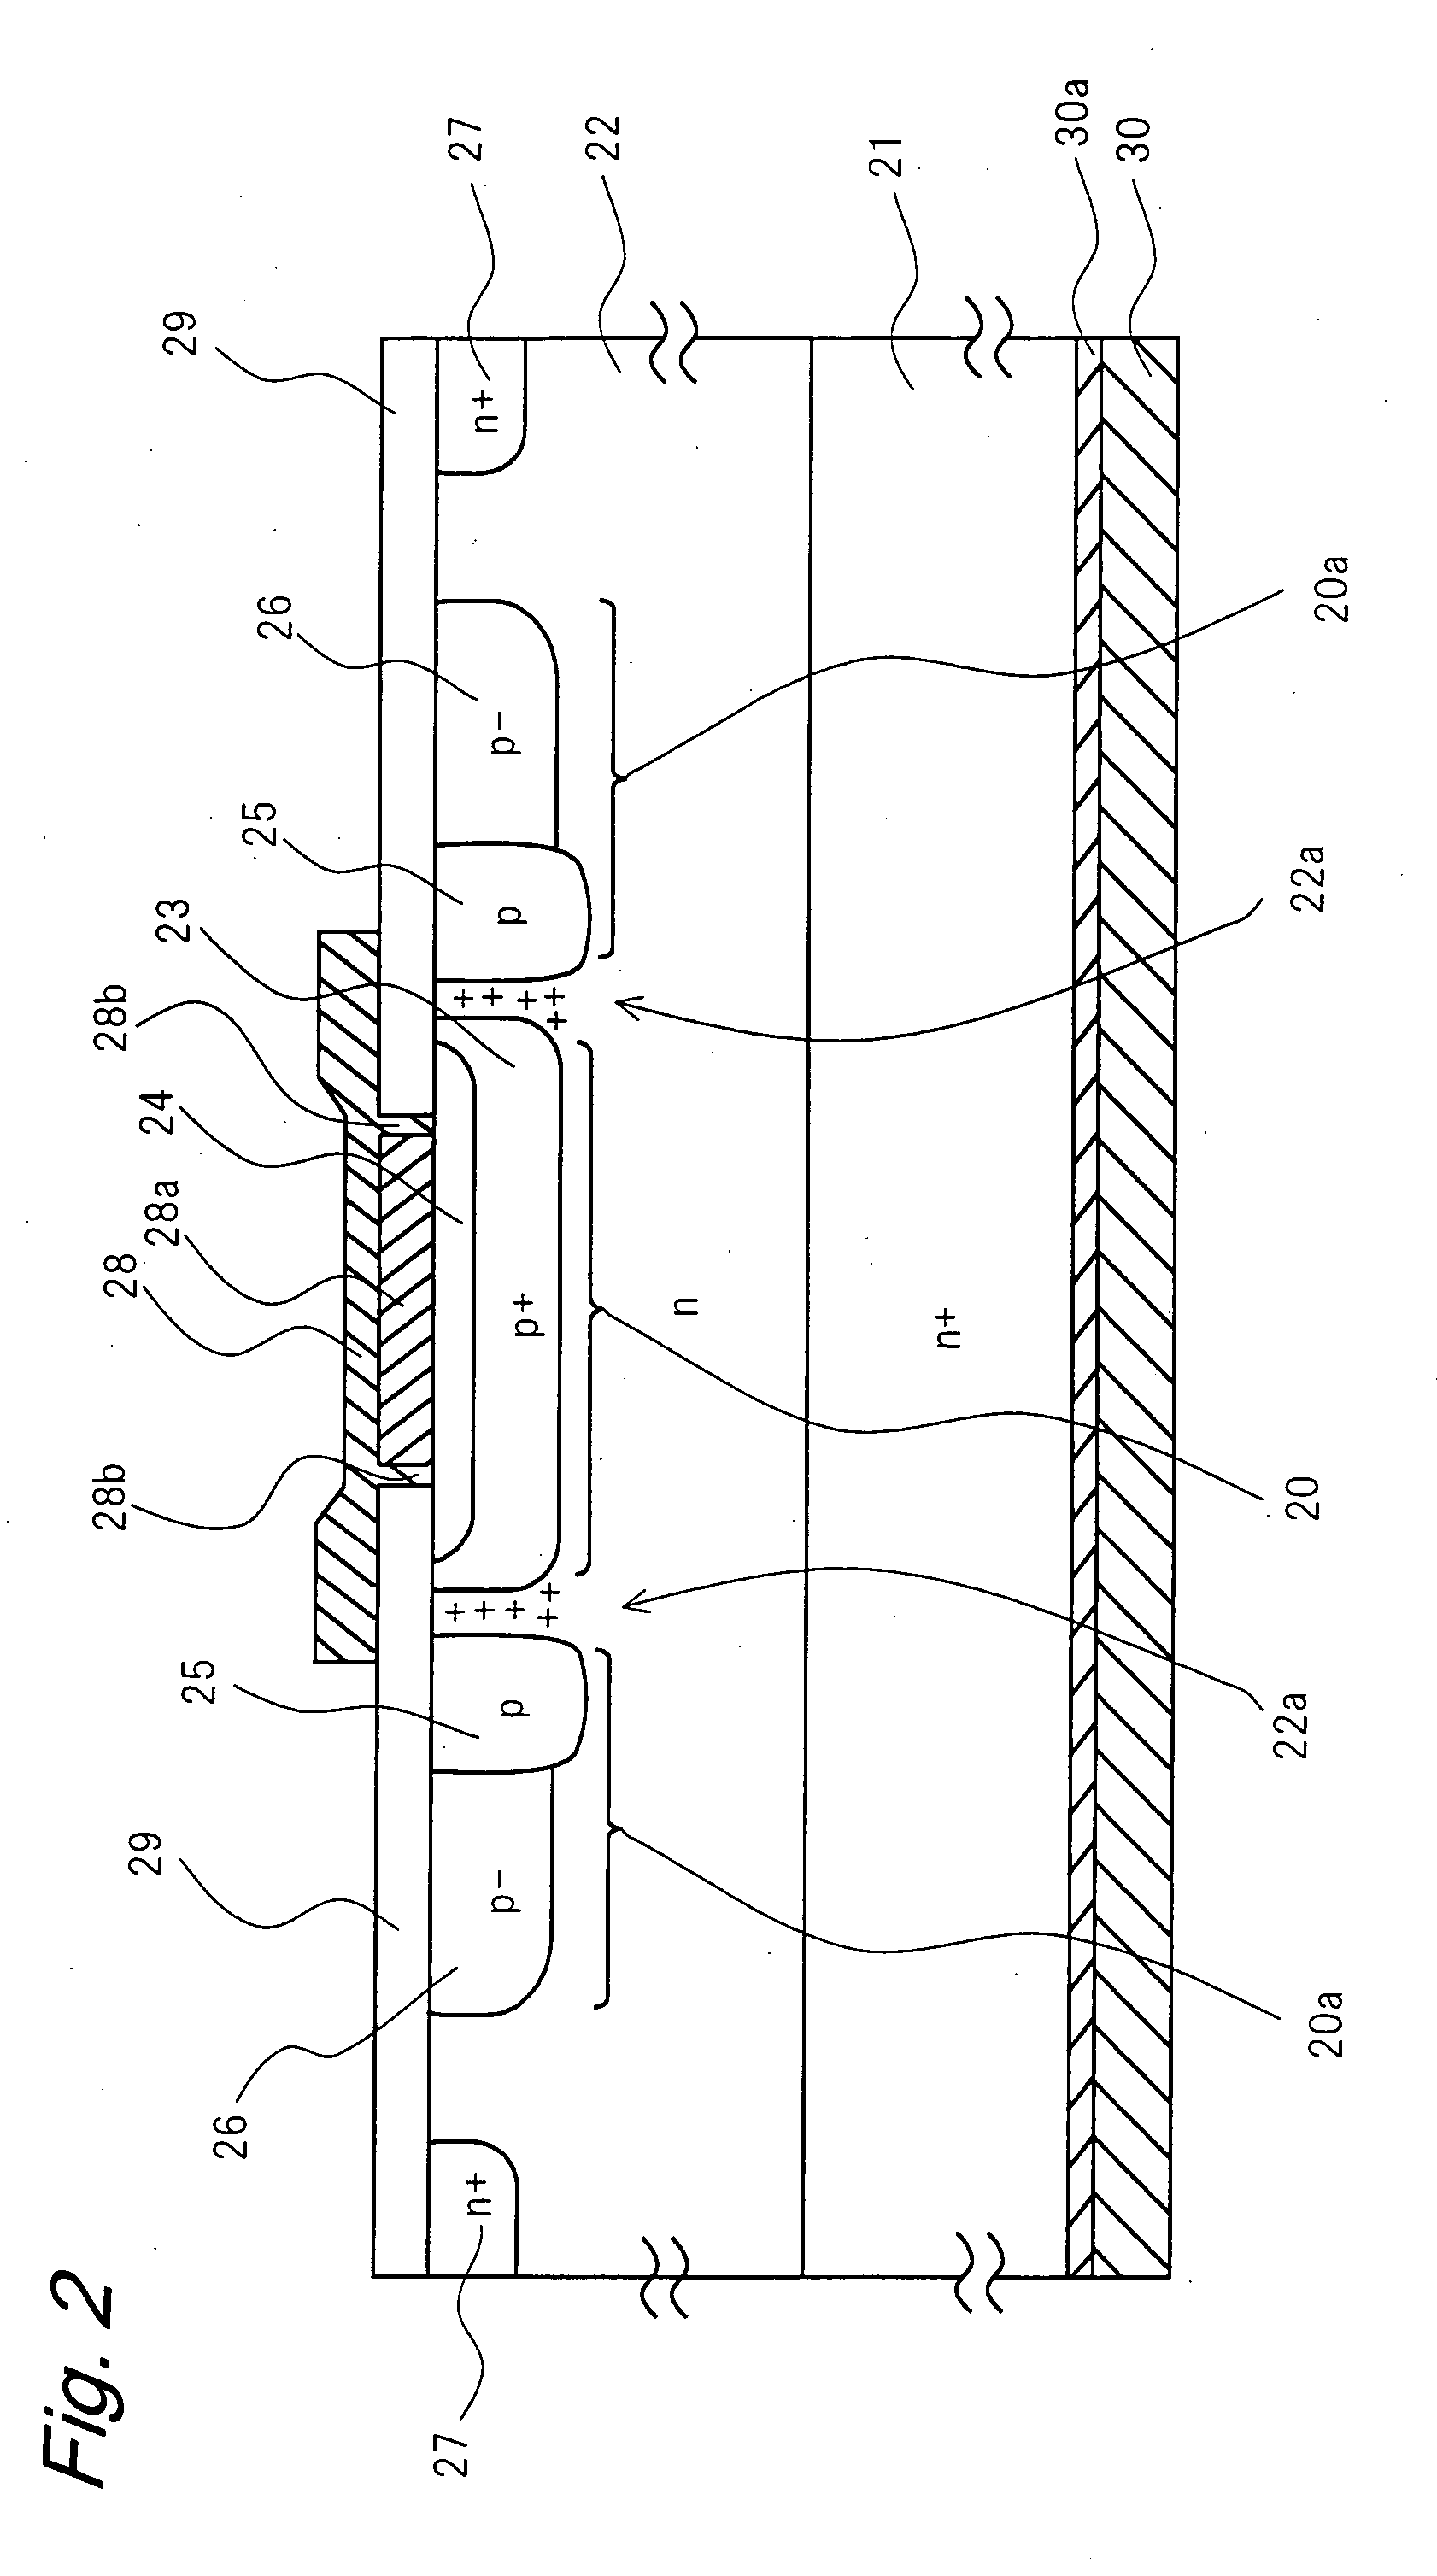 High-withstand voltage wide-gap semiconductor device and power device